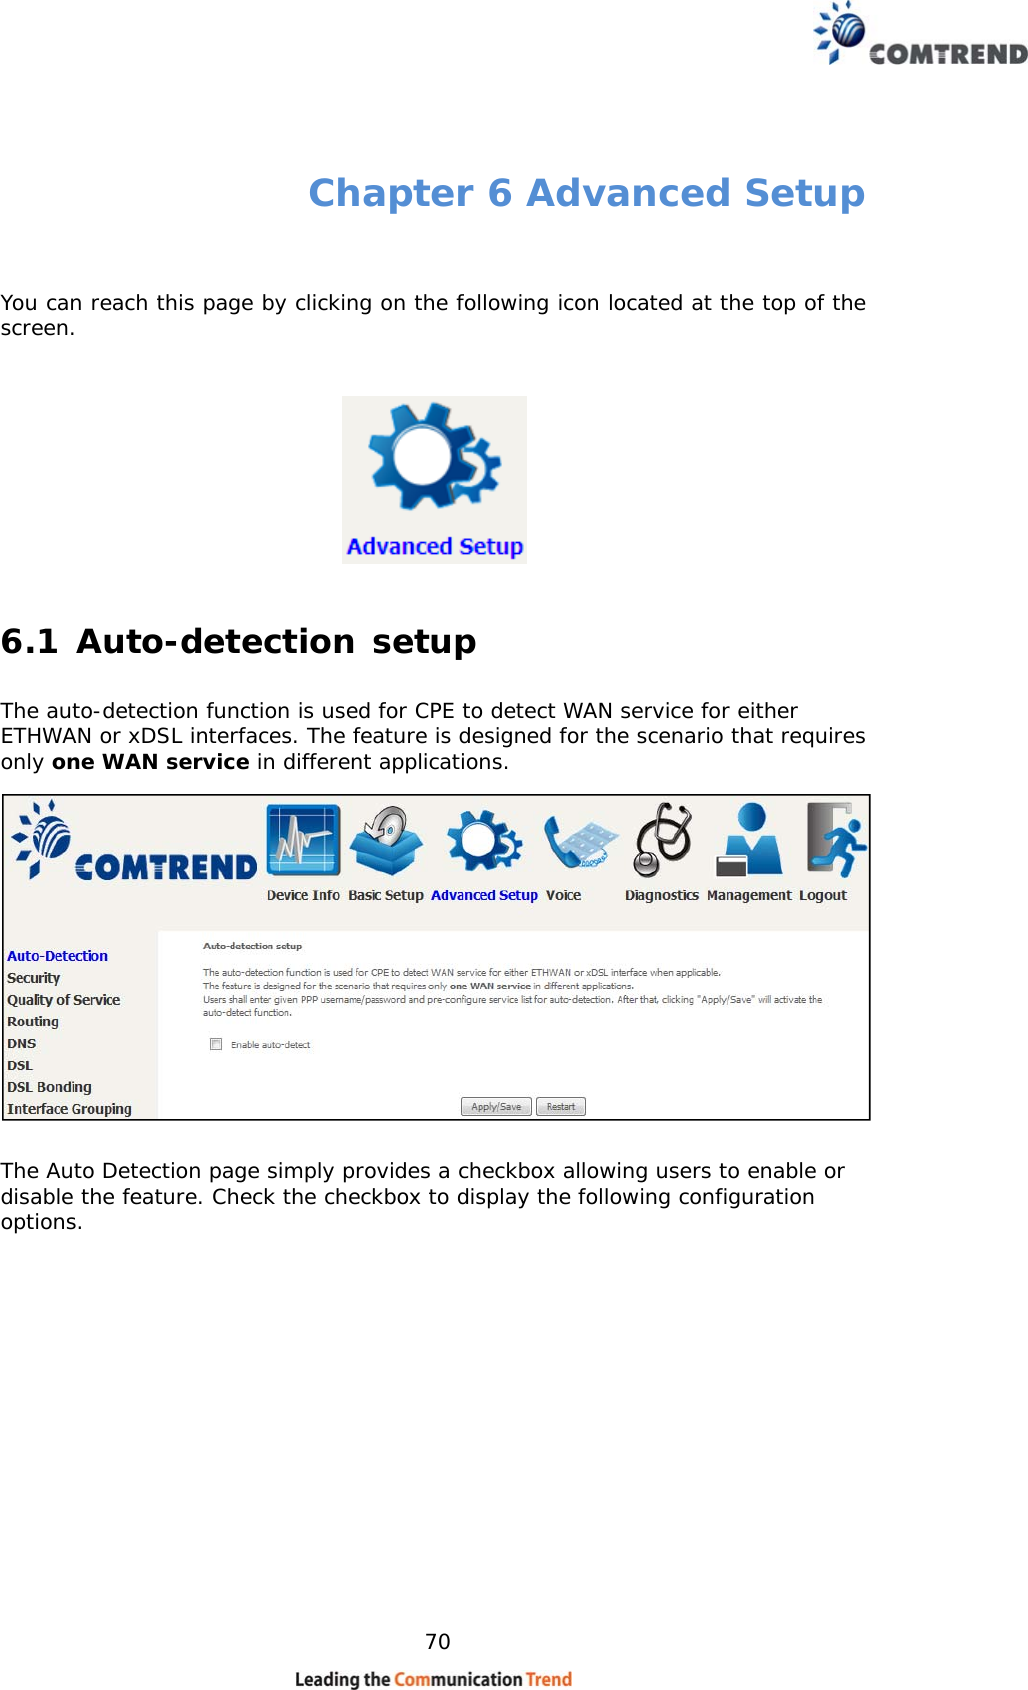    70 Chapter 6 Advanced Setup  You can reach this page by clicking on the following icon located at the top of the screen.  6.1 Auto-detection setup The auto-detection function is used for CPE to detect WAN service for either ETHWAN or xDSL interfaces. The feature is designed for the scenario that requires only one WAN service in different applications.   The Auto Detection page simply provides a checkbox allowing users to enable or disable the feature. Check the checkbox to display the following configuration options.            